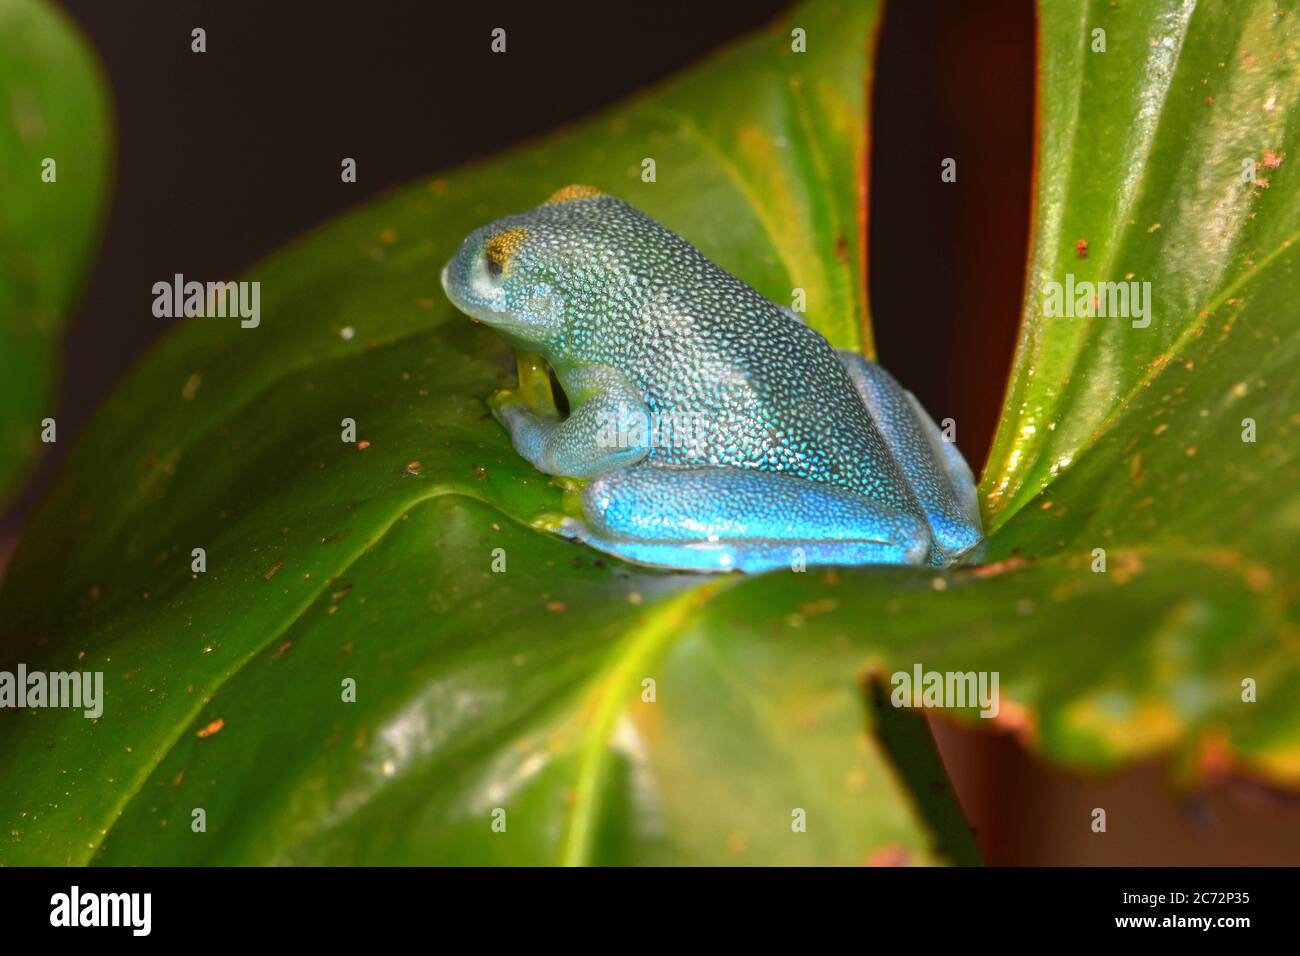 granular, slope snouted glass frog Stock Photo